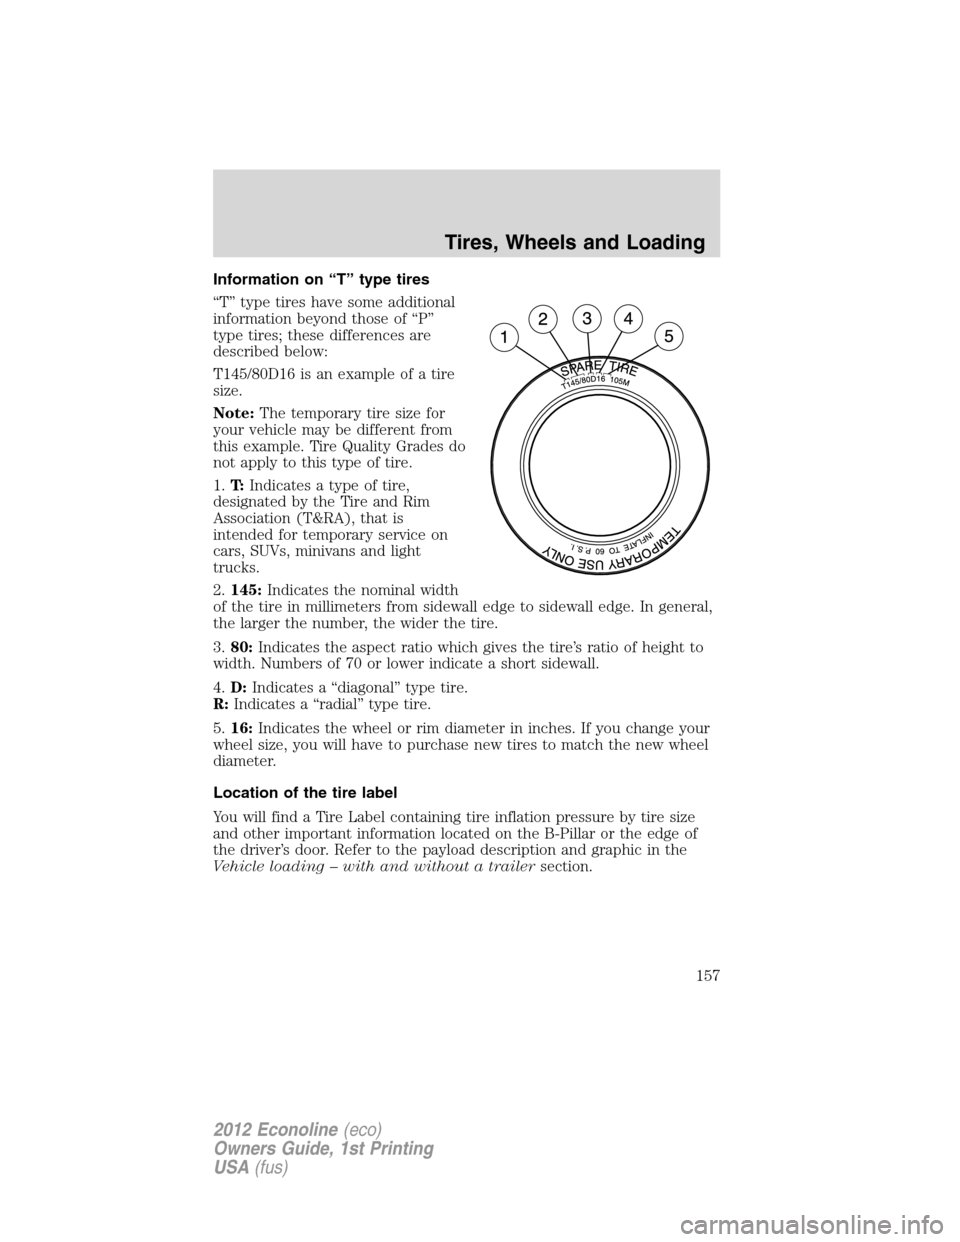 FORD E SERIES 2012 4.G Owners Manual Information on “T” type tires
“T” type tires have some additional
information beyond those of “P”
type tires; these differences are
described below:
T145/80D16 is an example of a tire
size